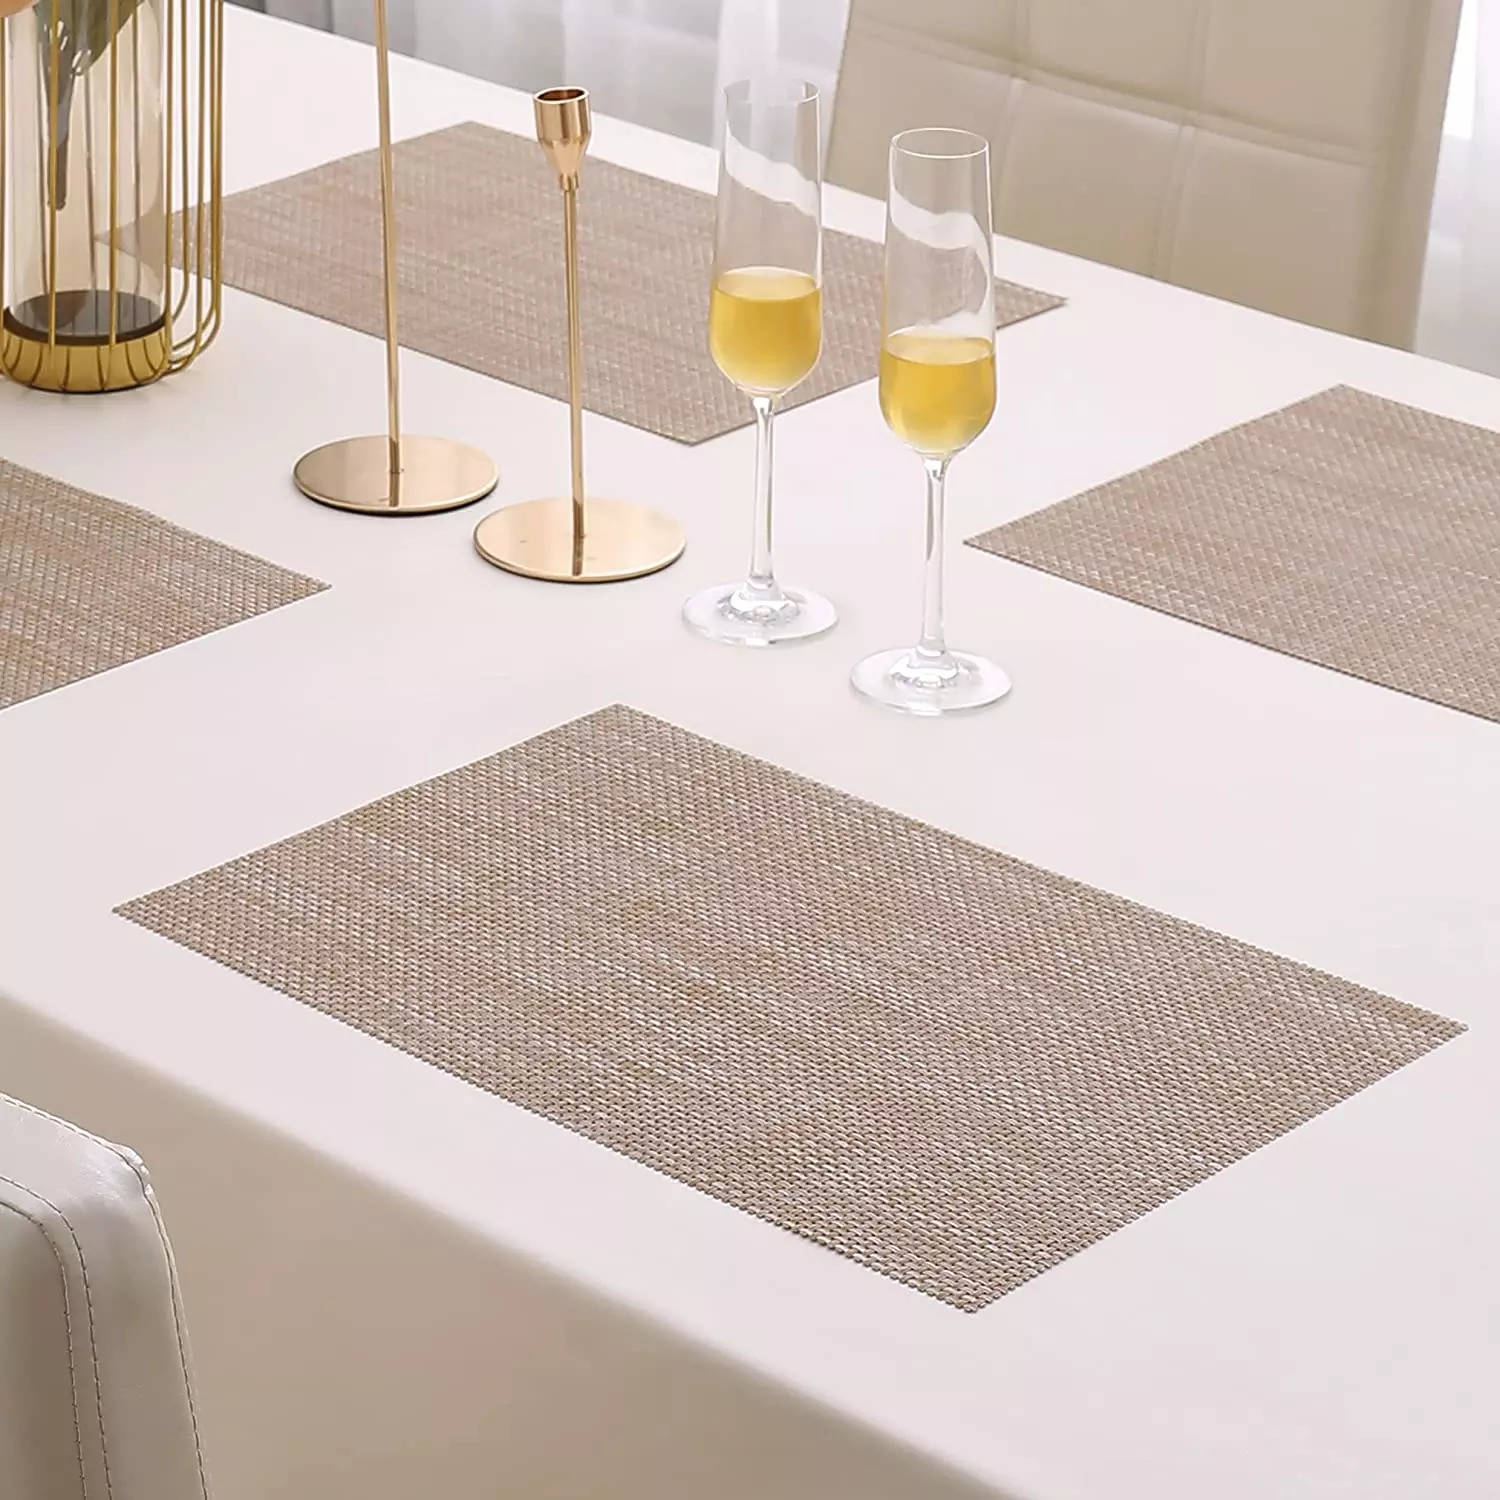 Elegant dining table placemats